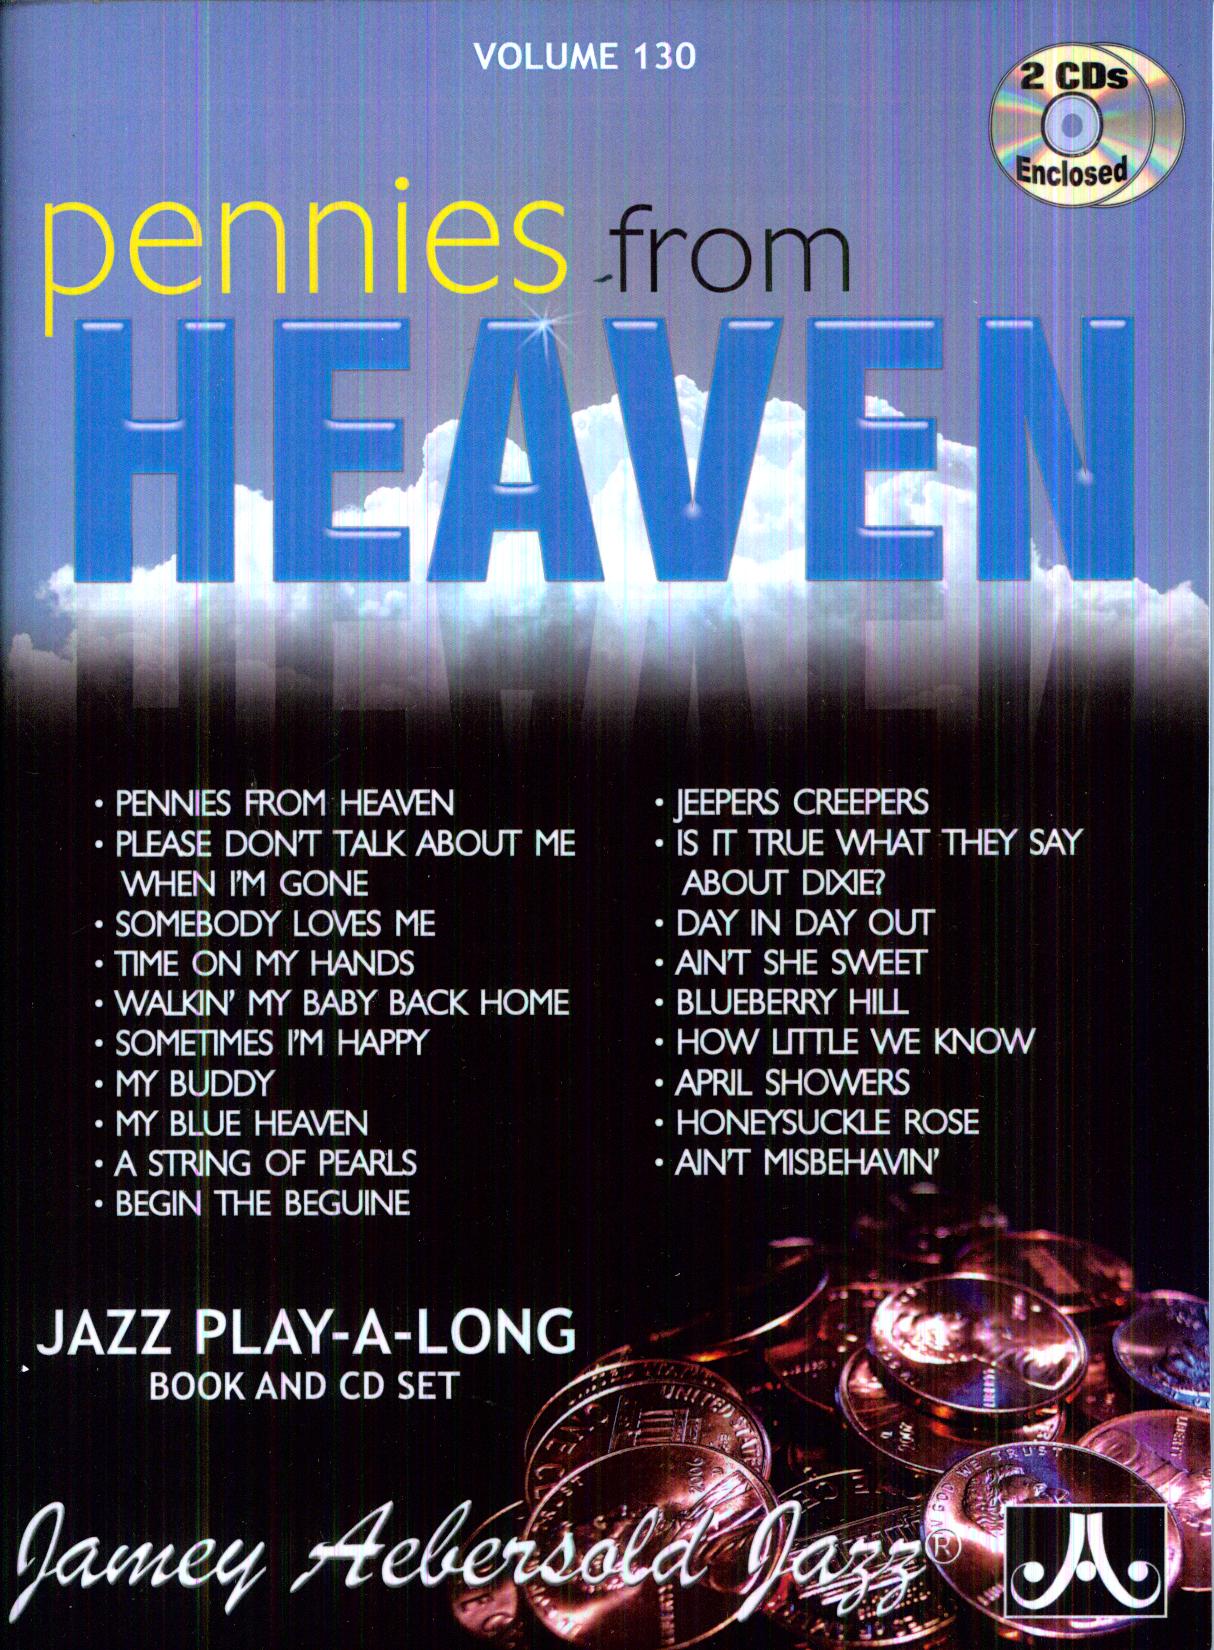 PENNIES FROM HEAVEN (W/BOOK)